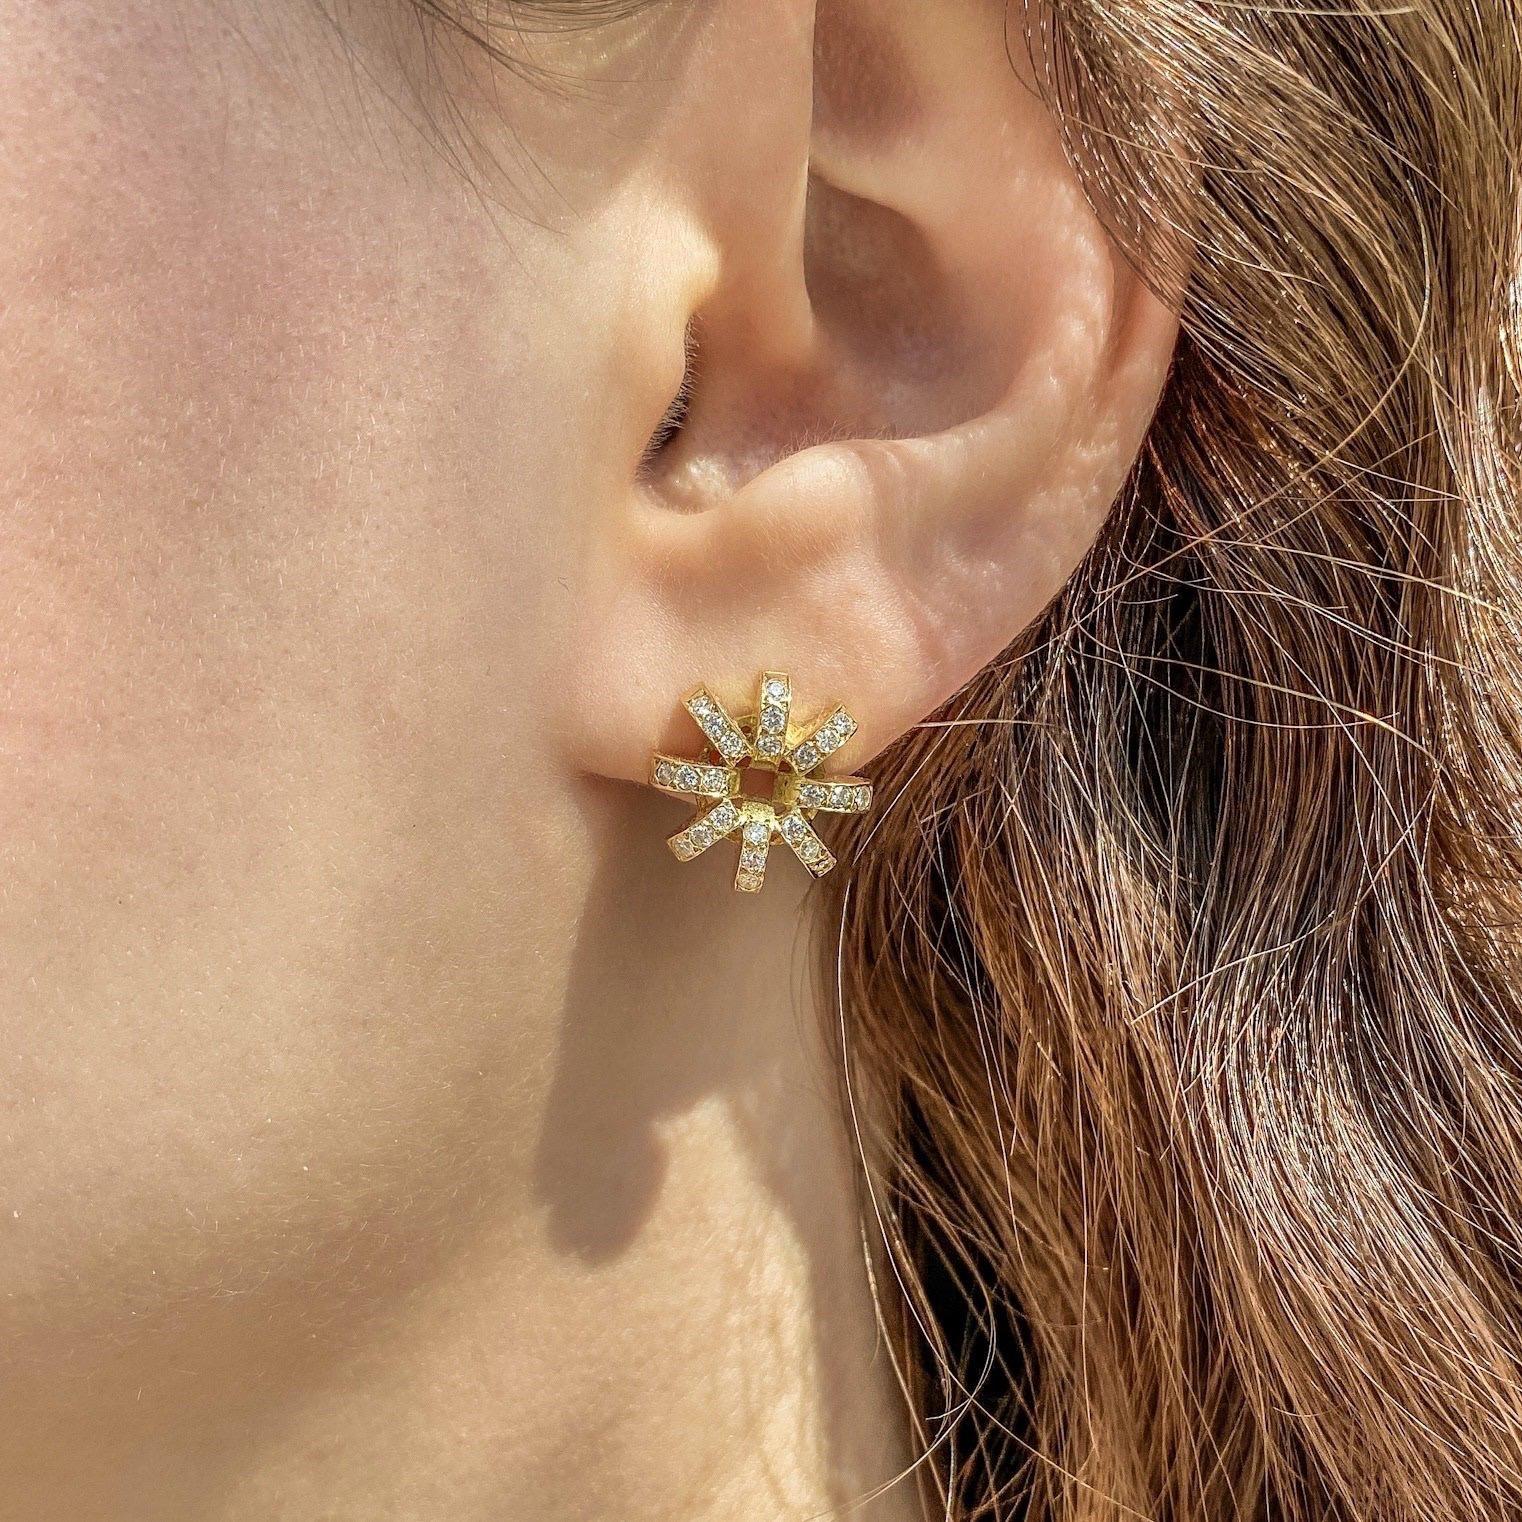 The 'Flower’, stud earrings are crafted in 18k gold, hallmarked in Cyprus. These elegant, diamond ear studs, come in a highly polished finish and feature White, VS Diamonds, totaling 0,48 Cts. The 'Flower’, stud earrings are part of Maria Kotsonis’s